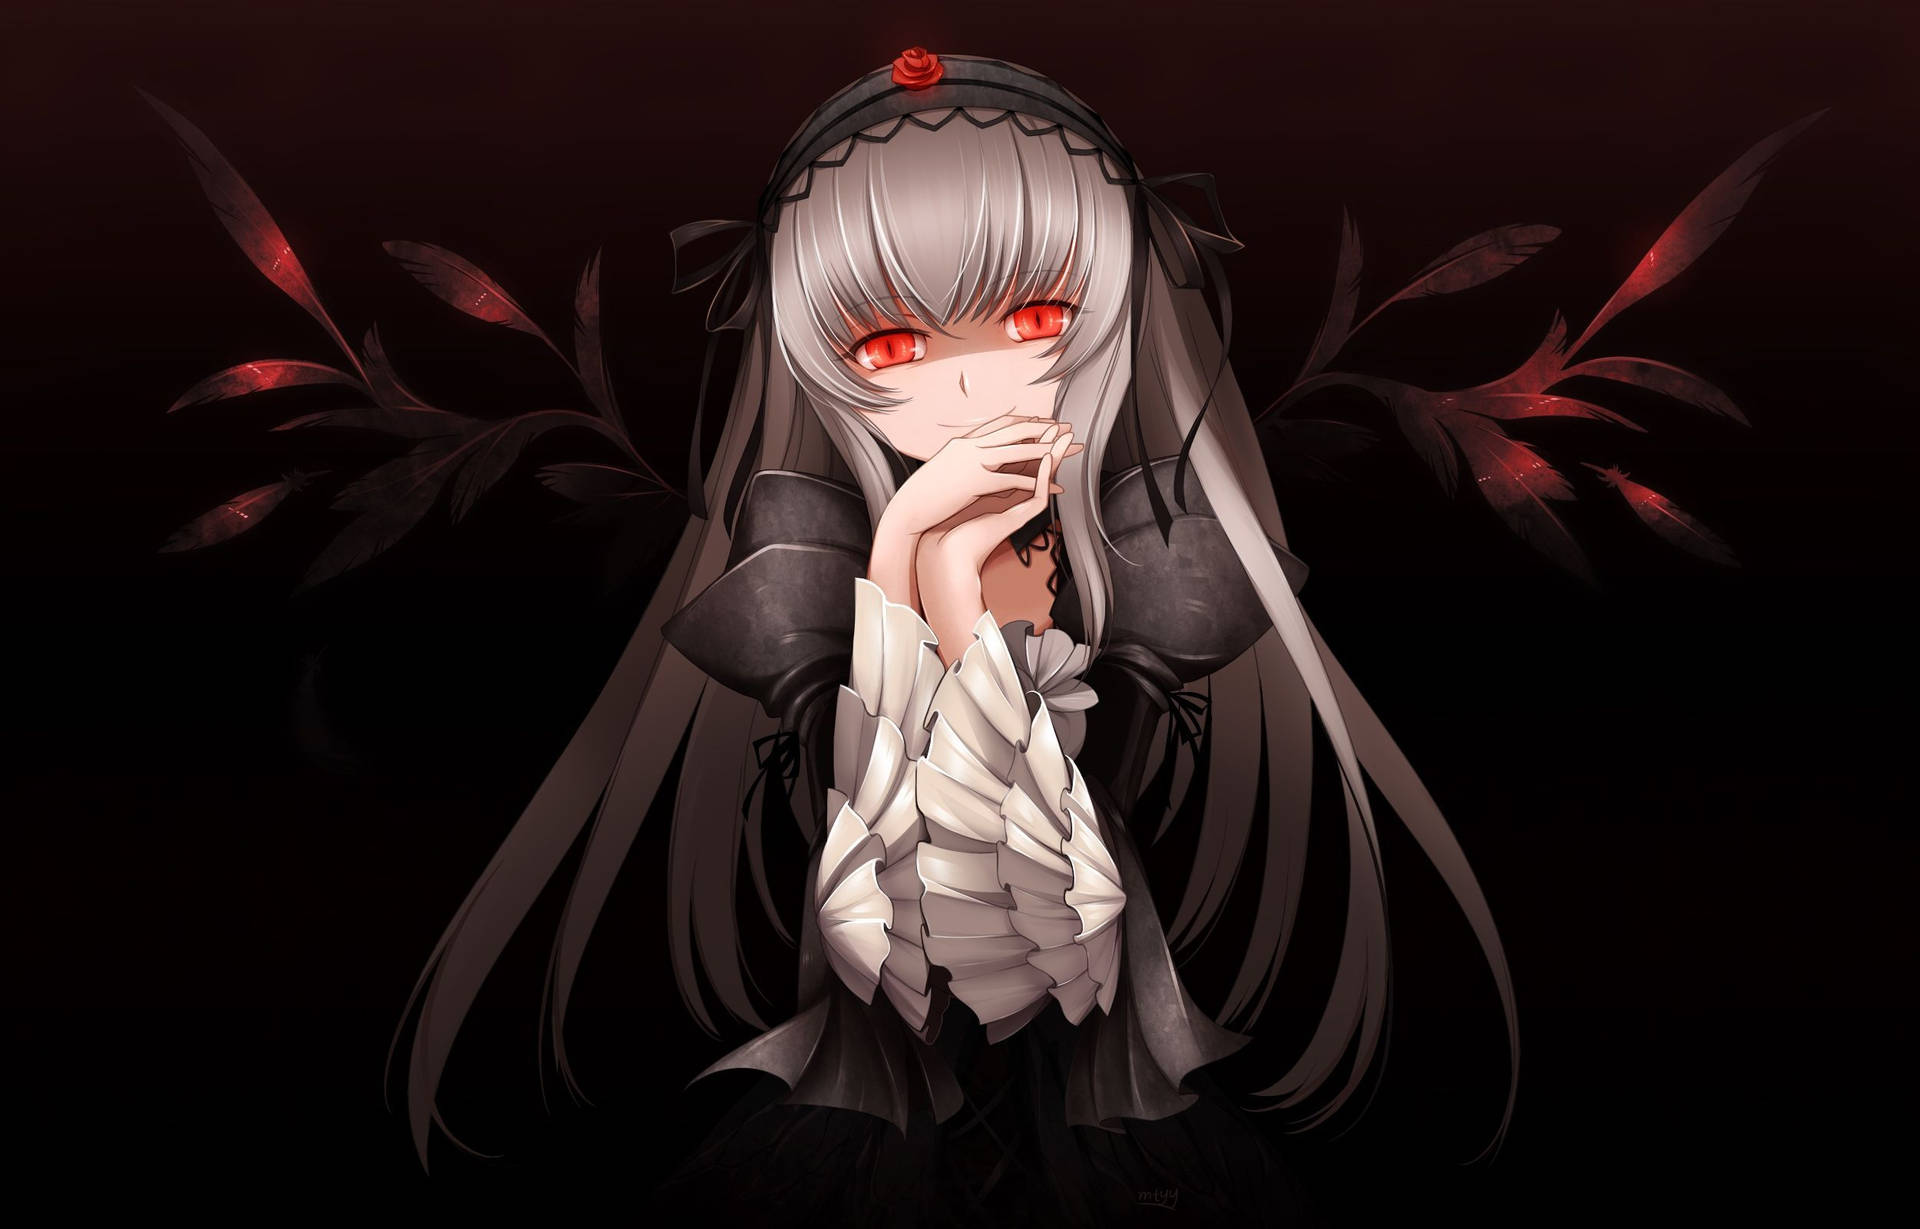 Anime Goth Girl With Red Eyes PFP Wallpaper